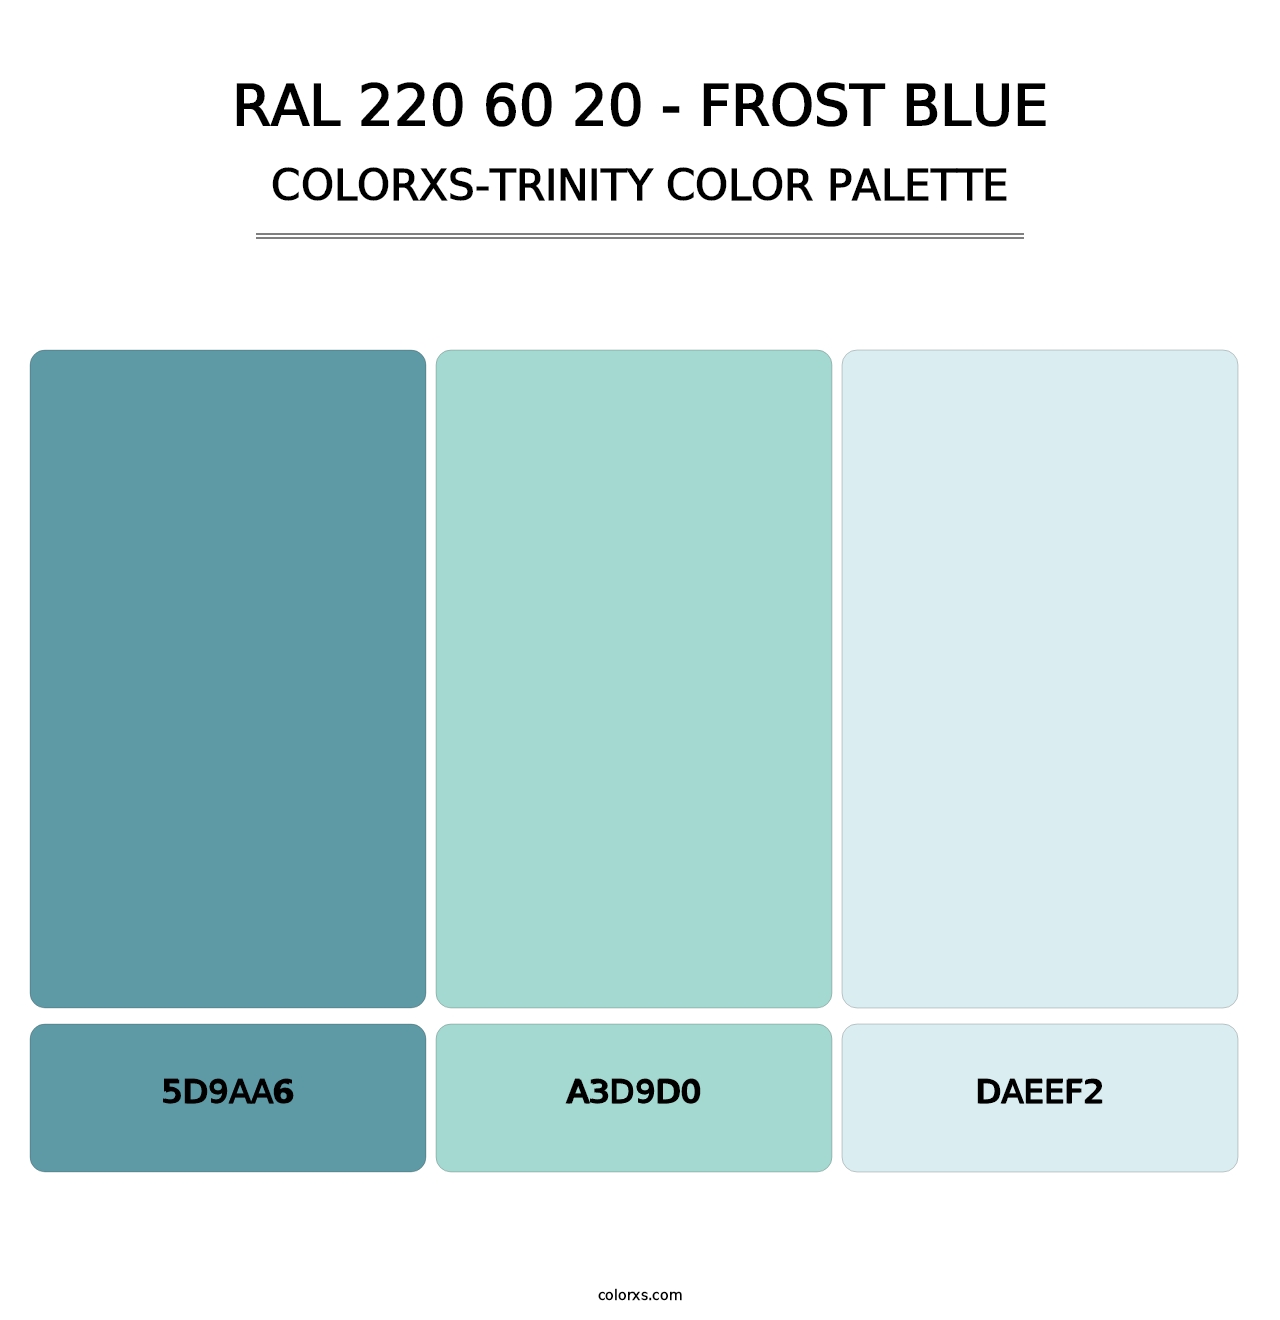 RAL 220 60 20 - Frost Blue - Colorxs Trinity Palette